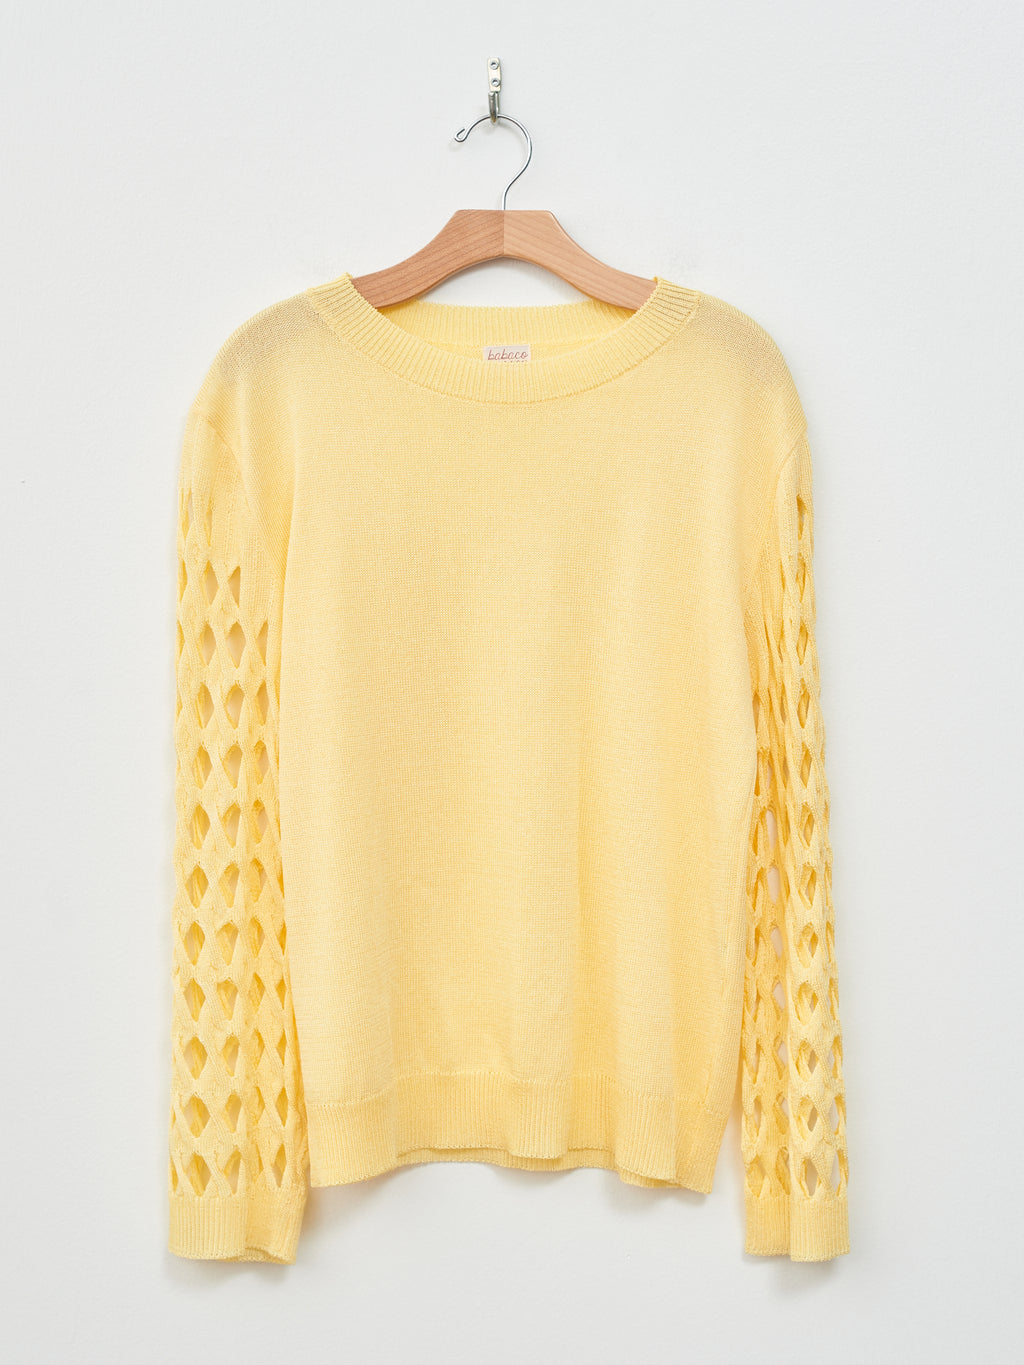 Namu Shop - Babaco Cable Sleeve Pullover - Cream Yellow